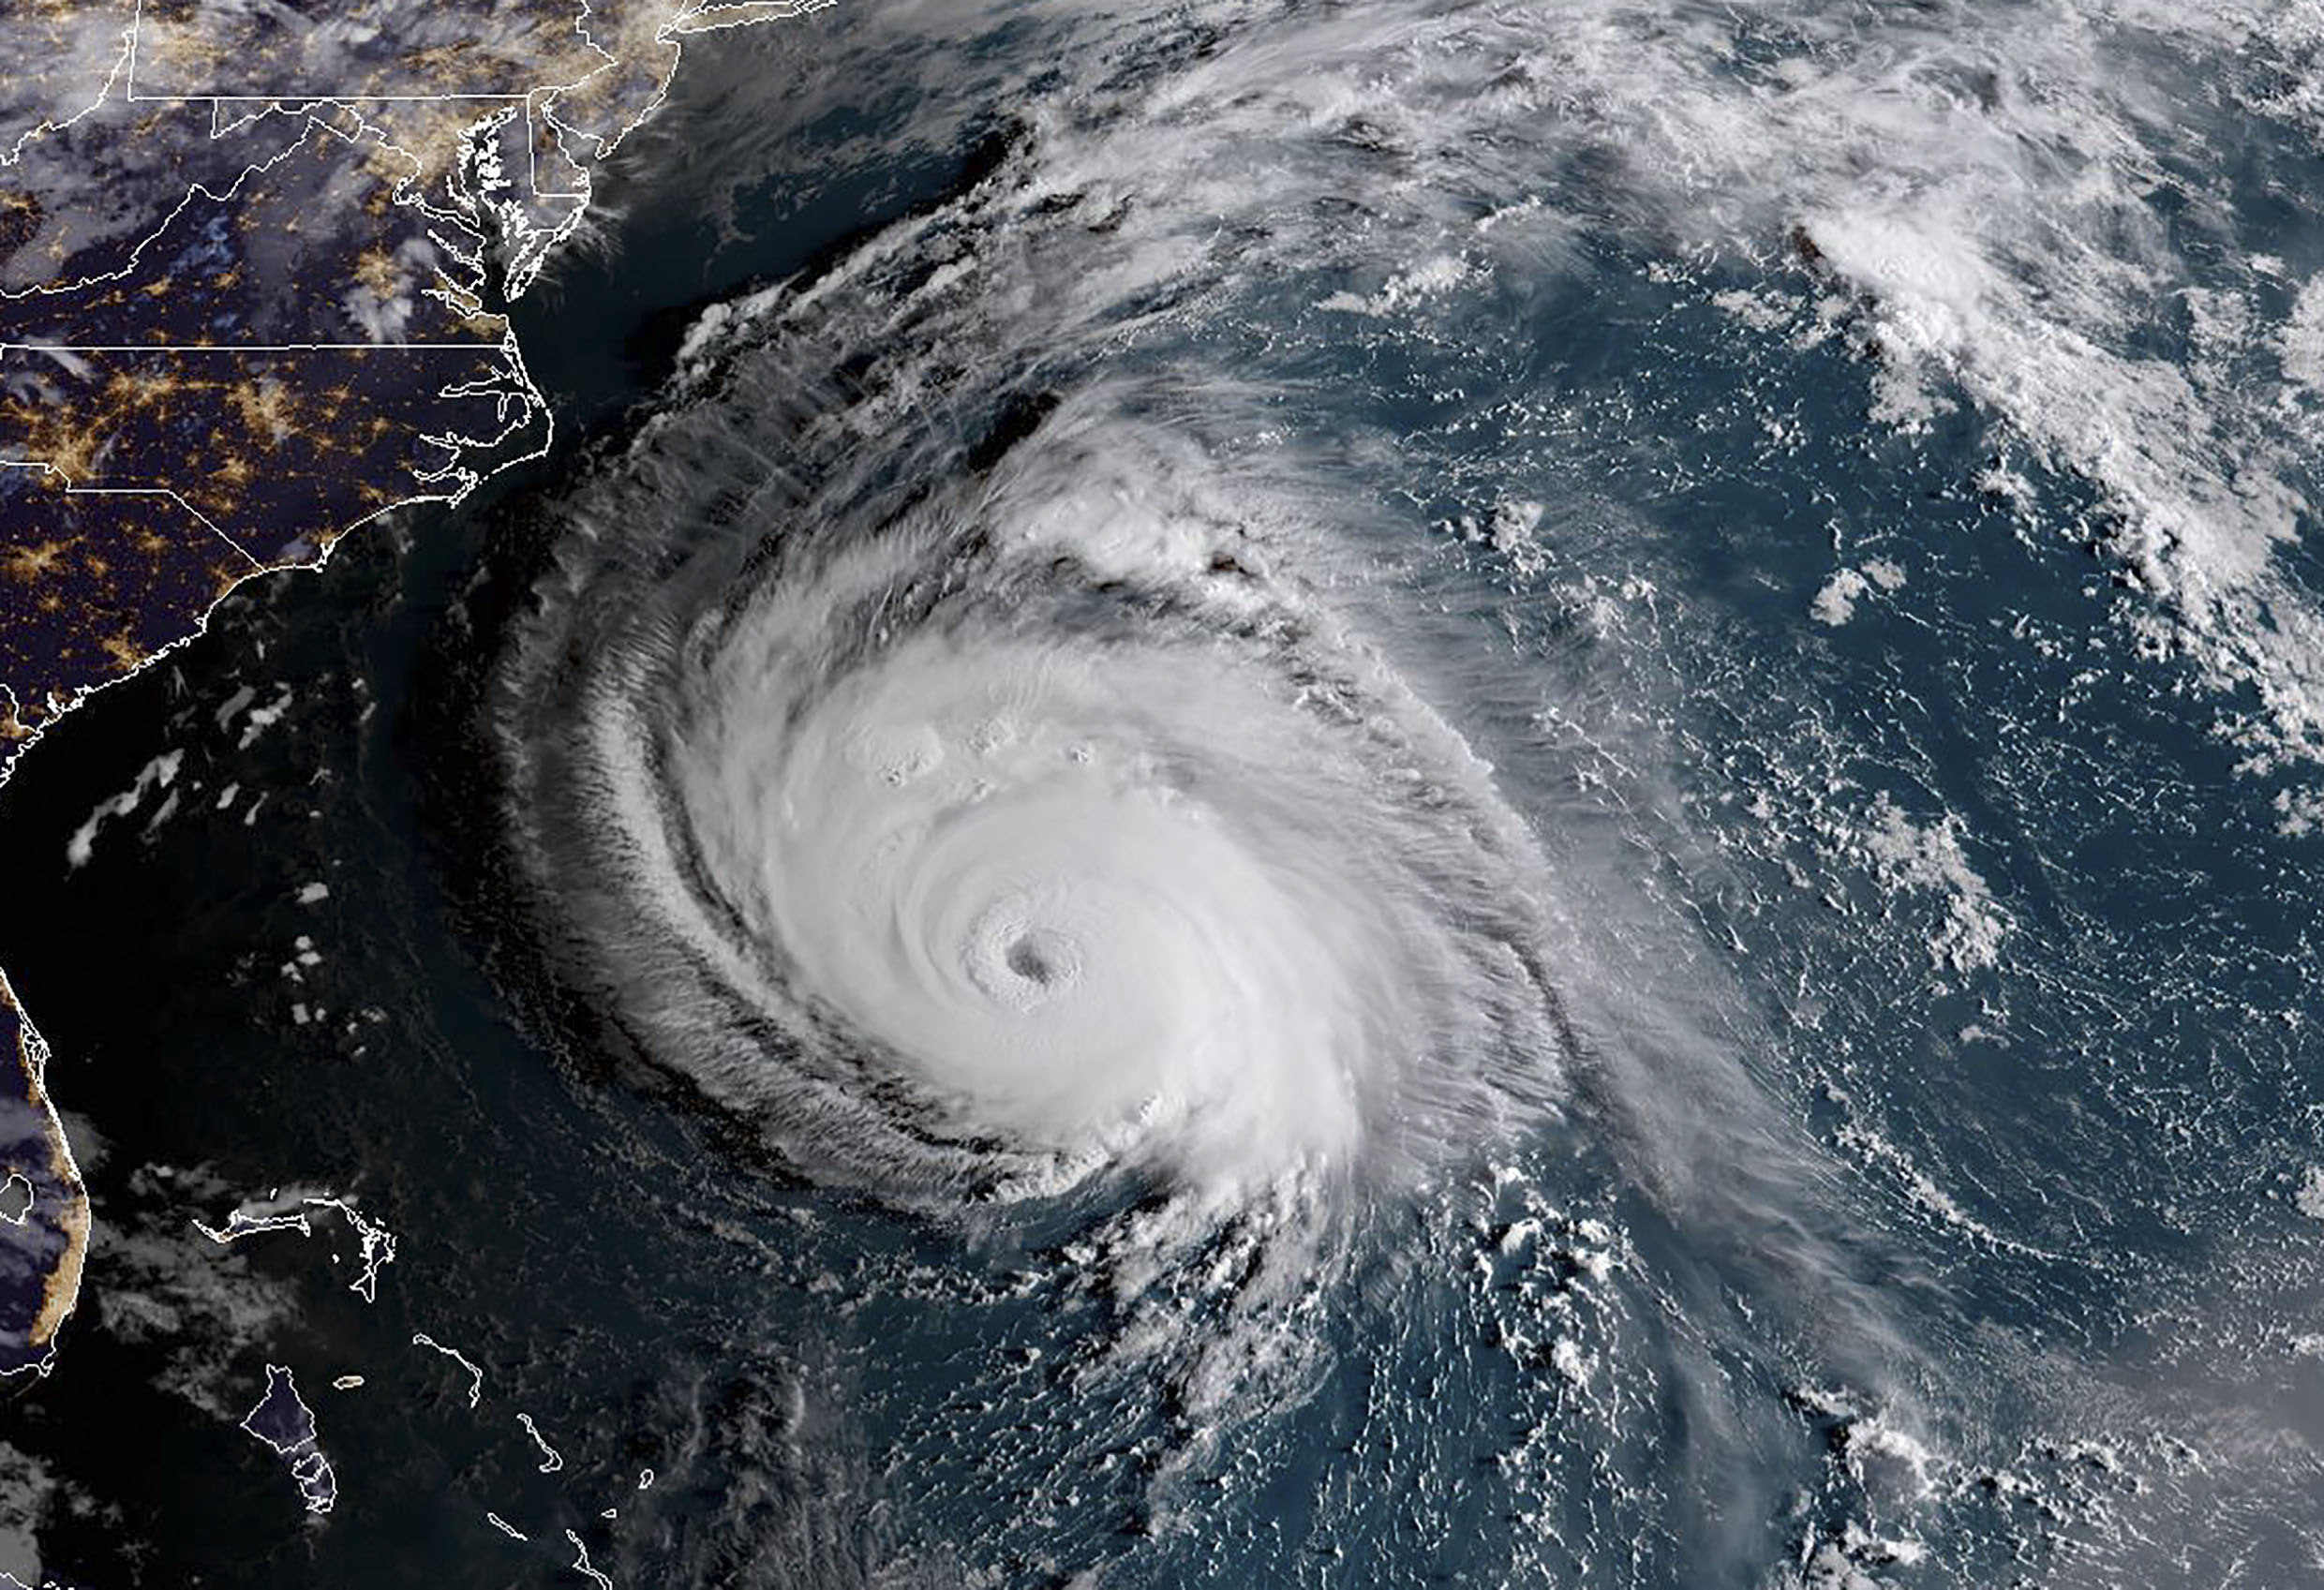 Inside the National Weather Service, the Digital Eye of Hurricane Florence